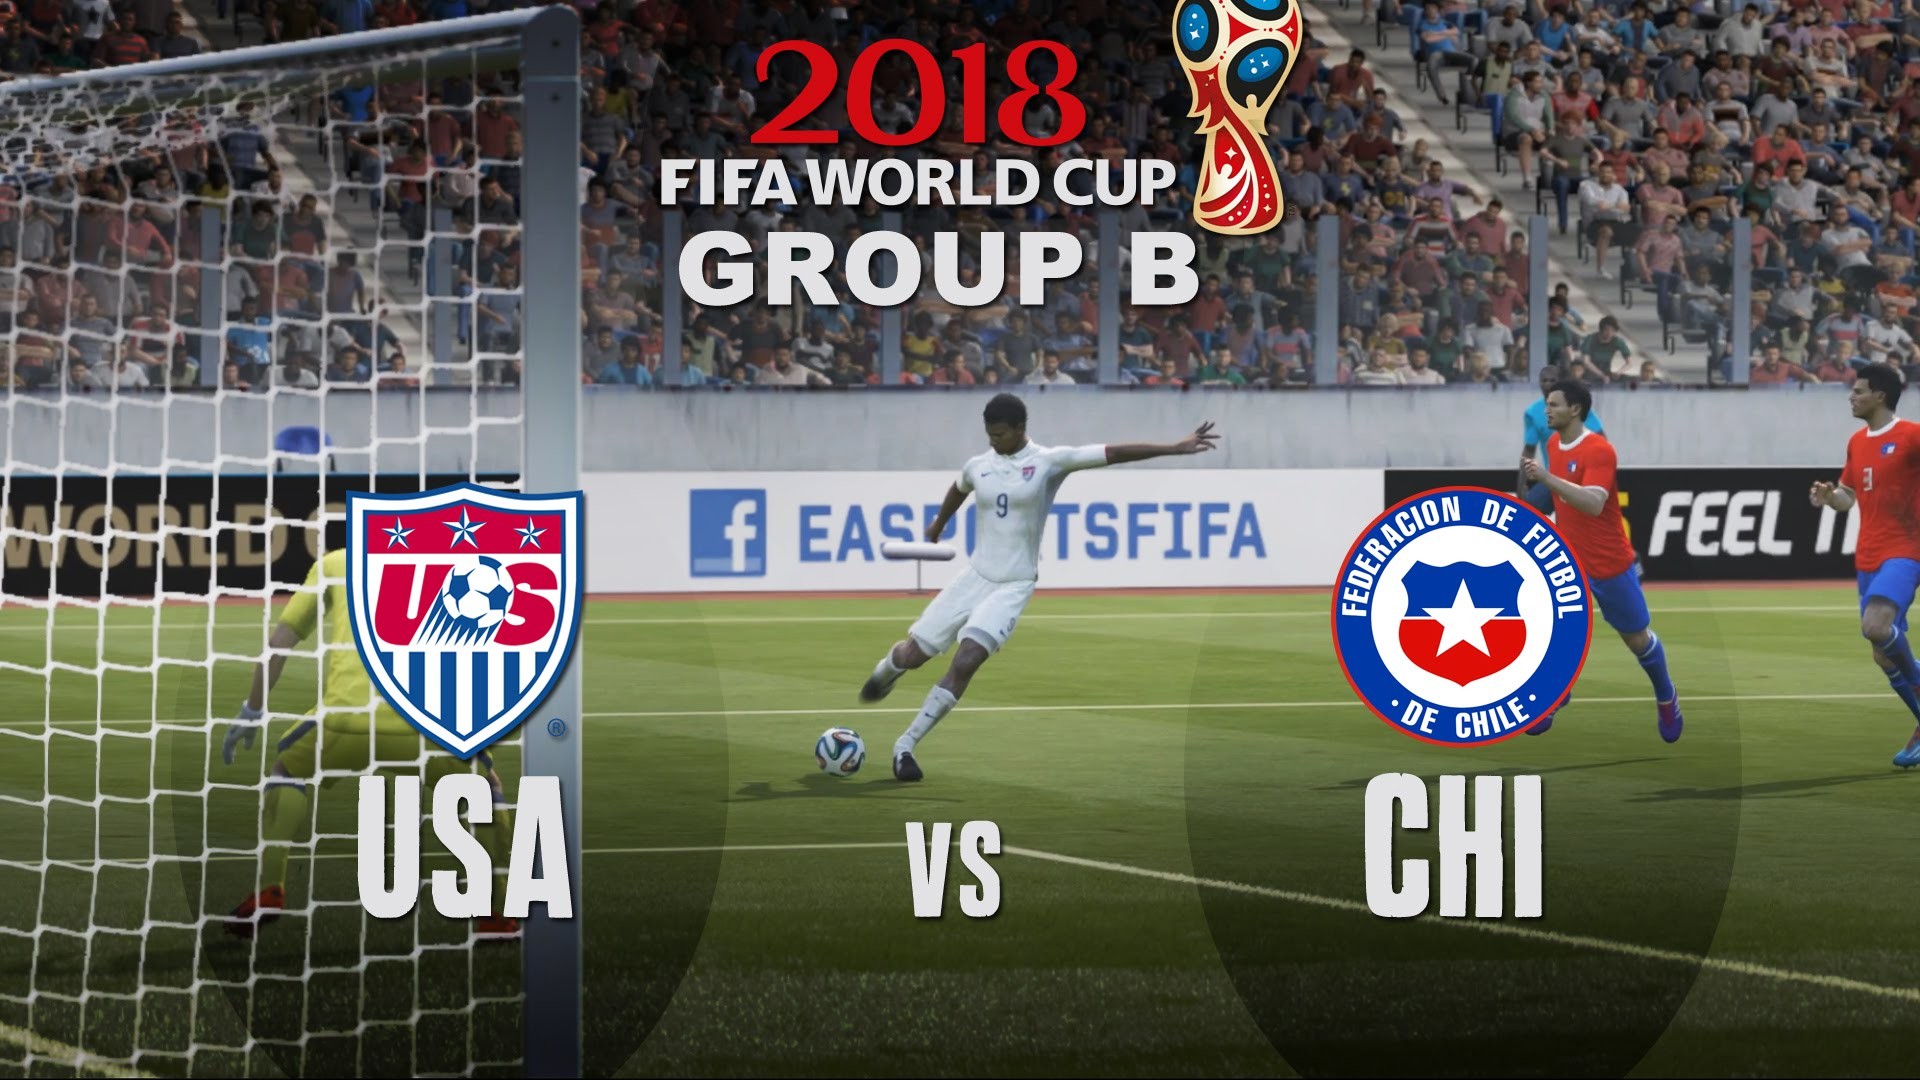 1920x1080 World Cup 2018 - USA vs Chile - Group B Match #3 - FIFA Gameplay - YouTube